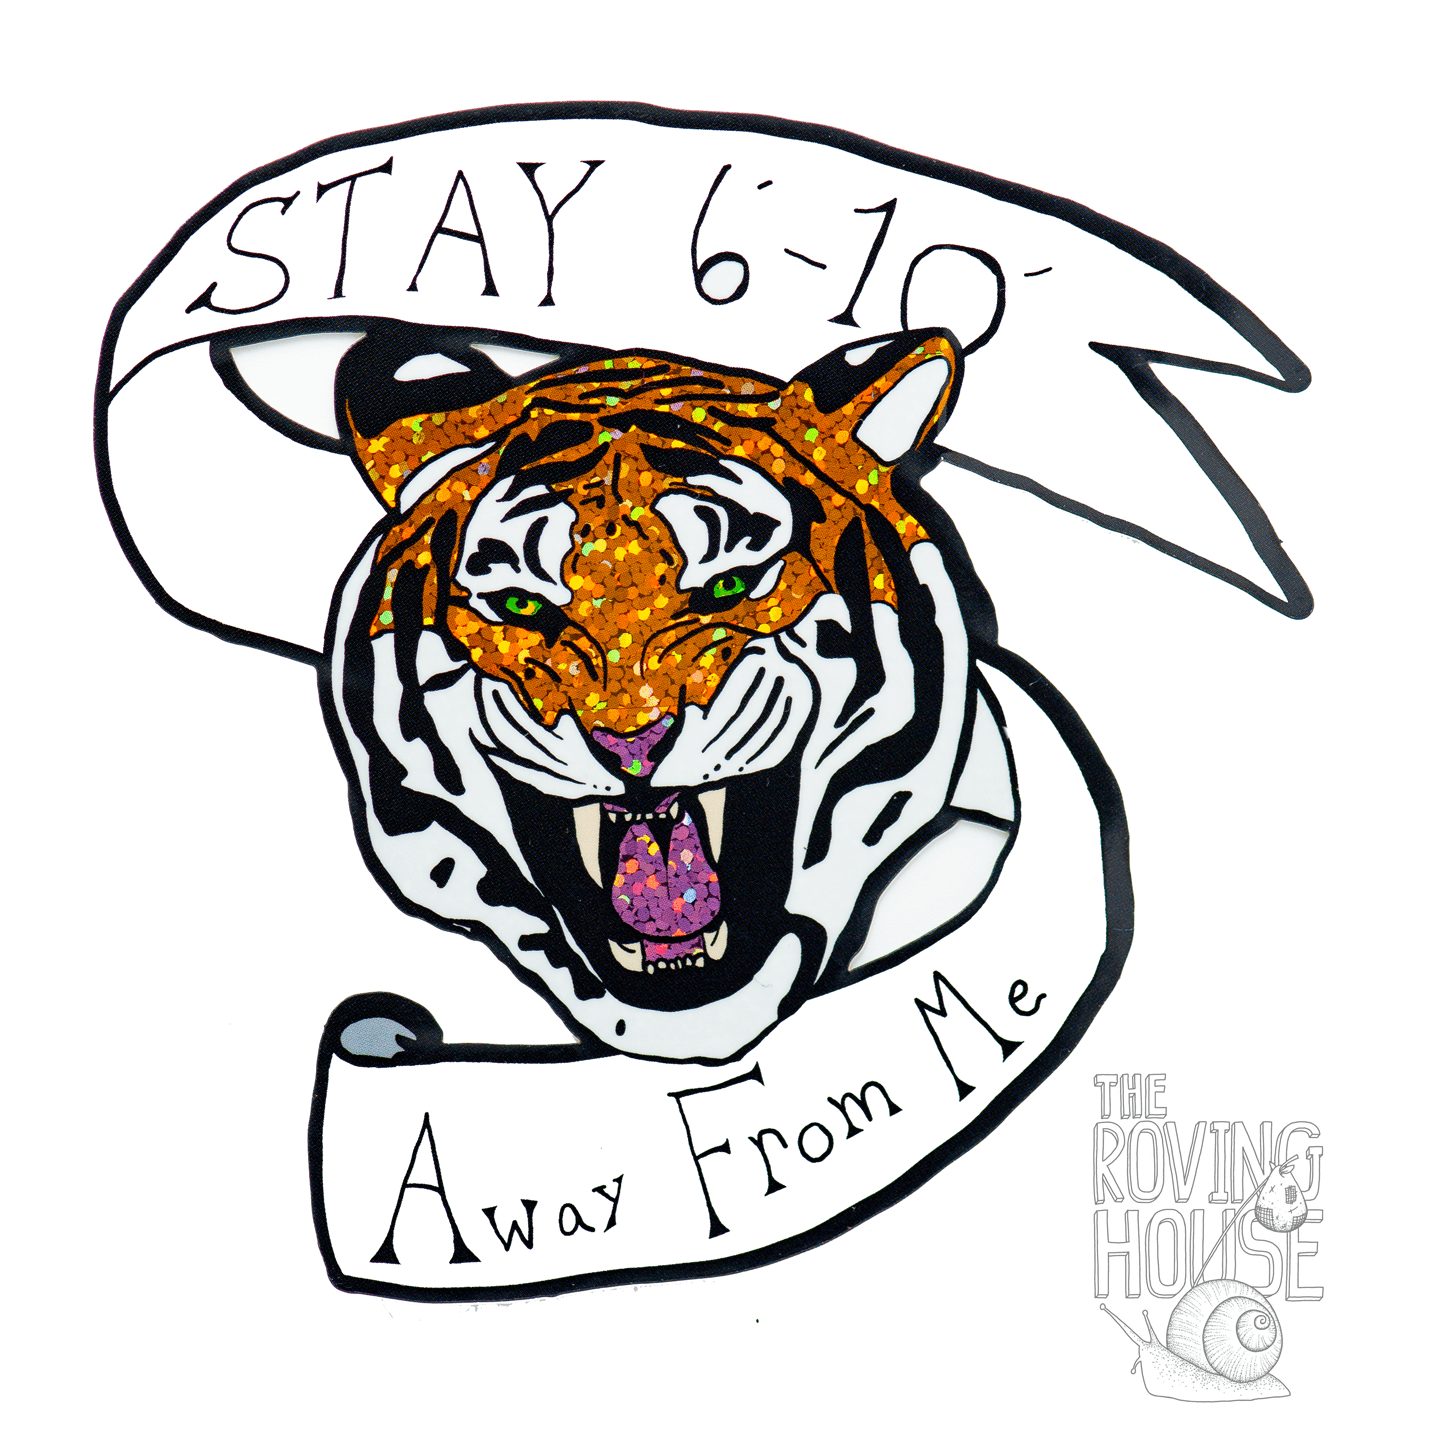 A glitter vinyl sticker featuring the head of a snarling orange tiger, surrounded by a black and white banner that says "STAY 6' - 10' Away From Me".